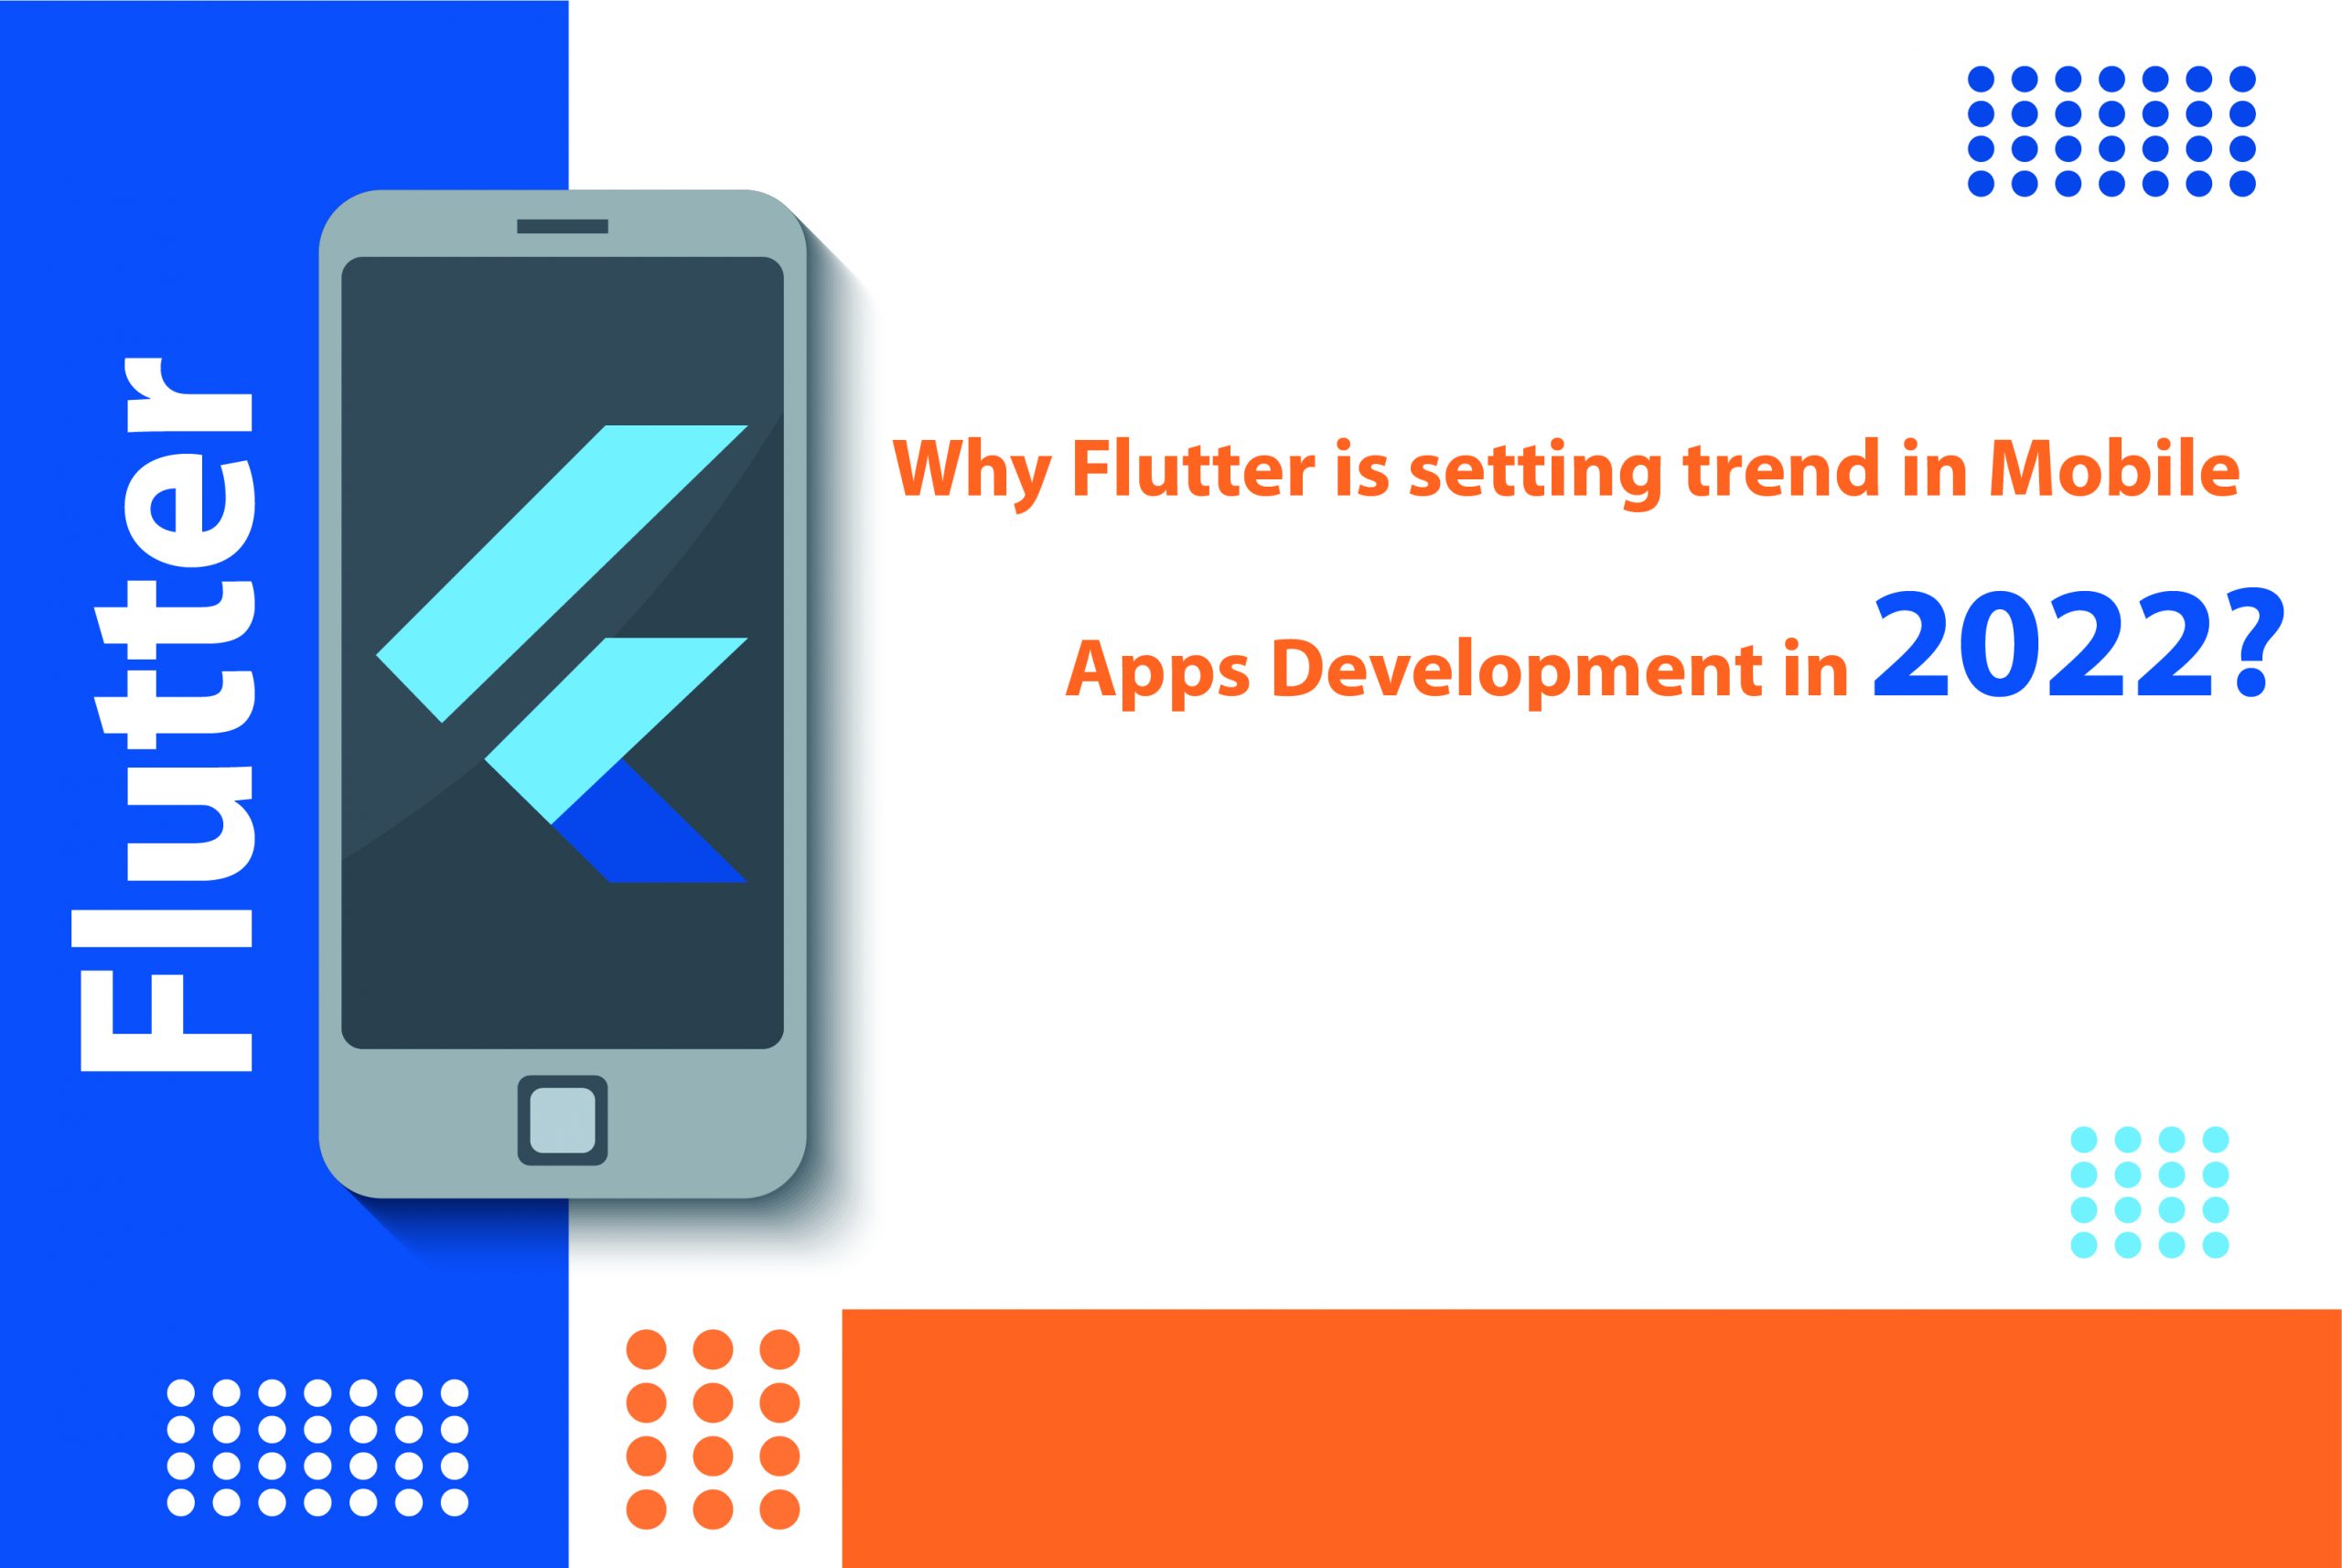 Why Flutter is setting trend in Mobile Apps Development in 2022?